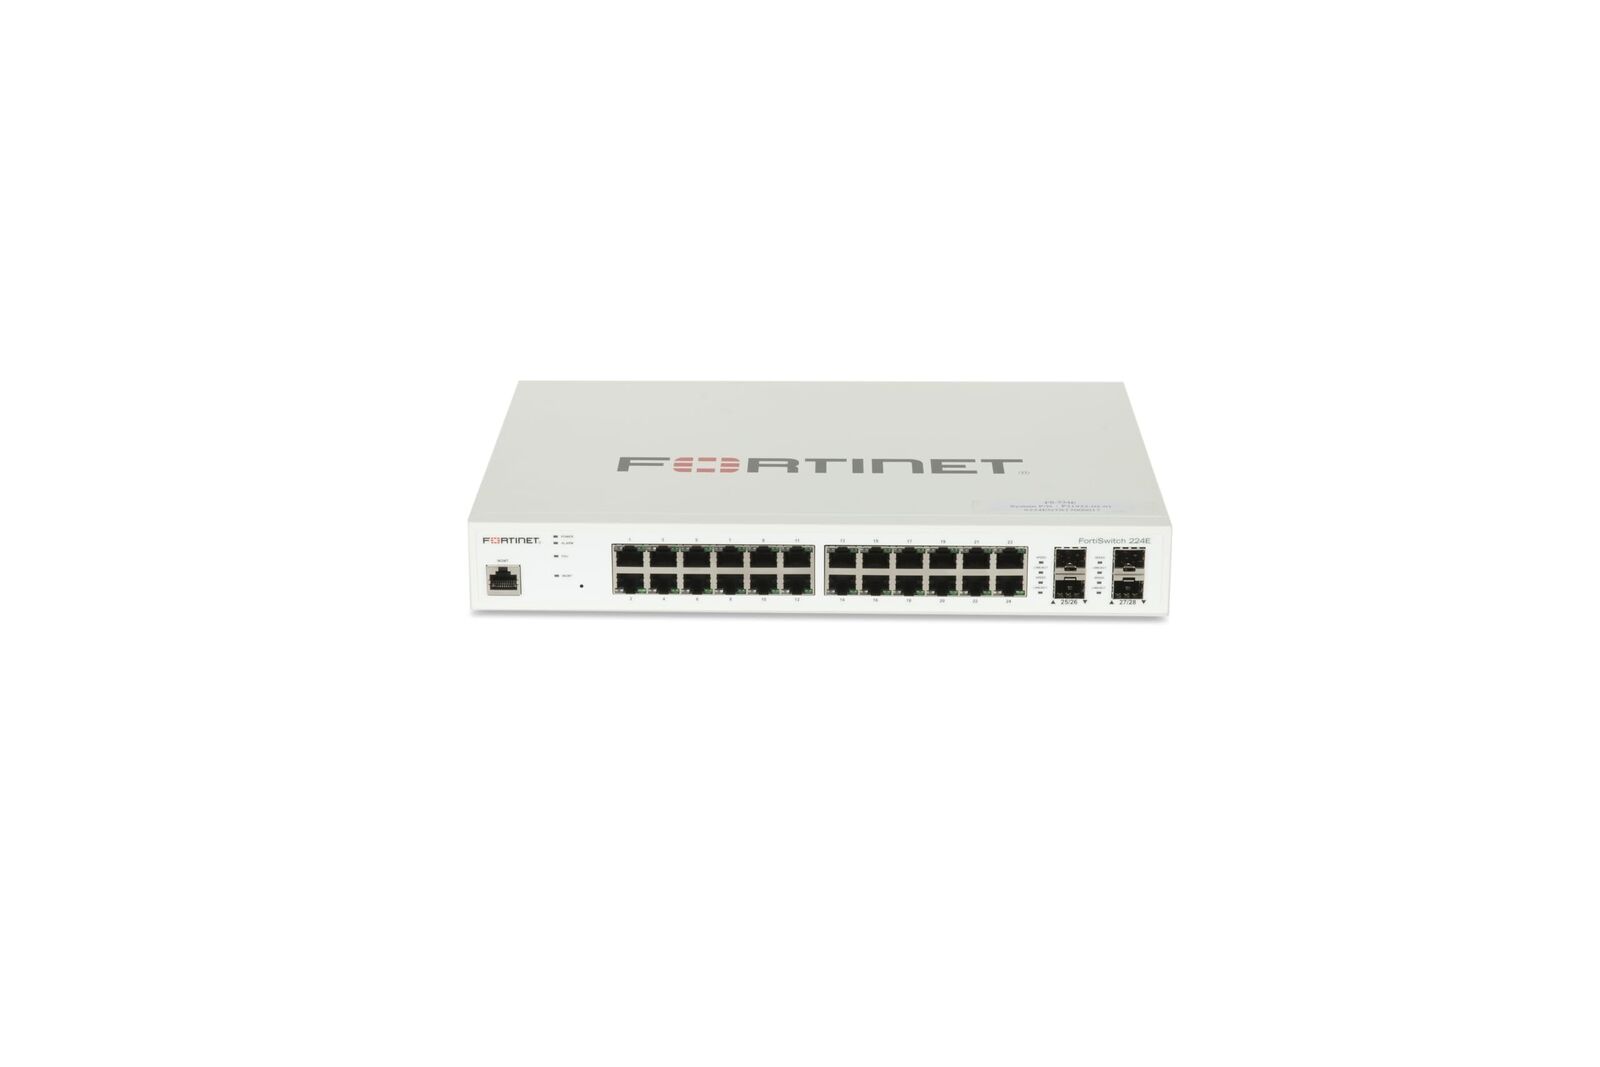 Fortinet FortiSwitch - 224E Layer 2/3 Switch (FS-224E)